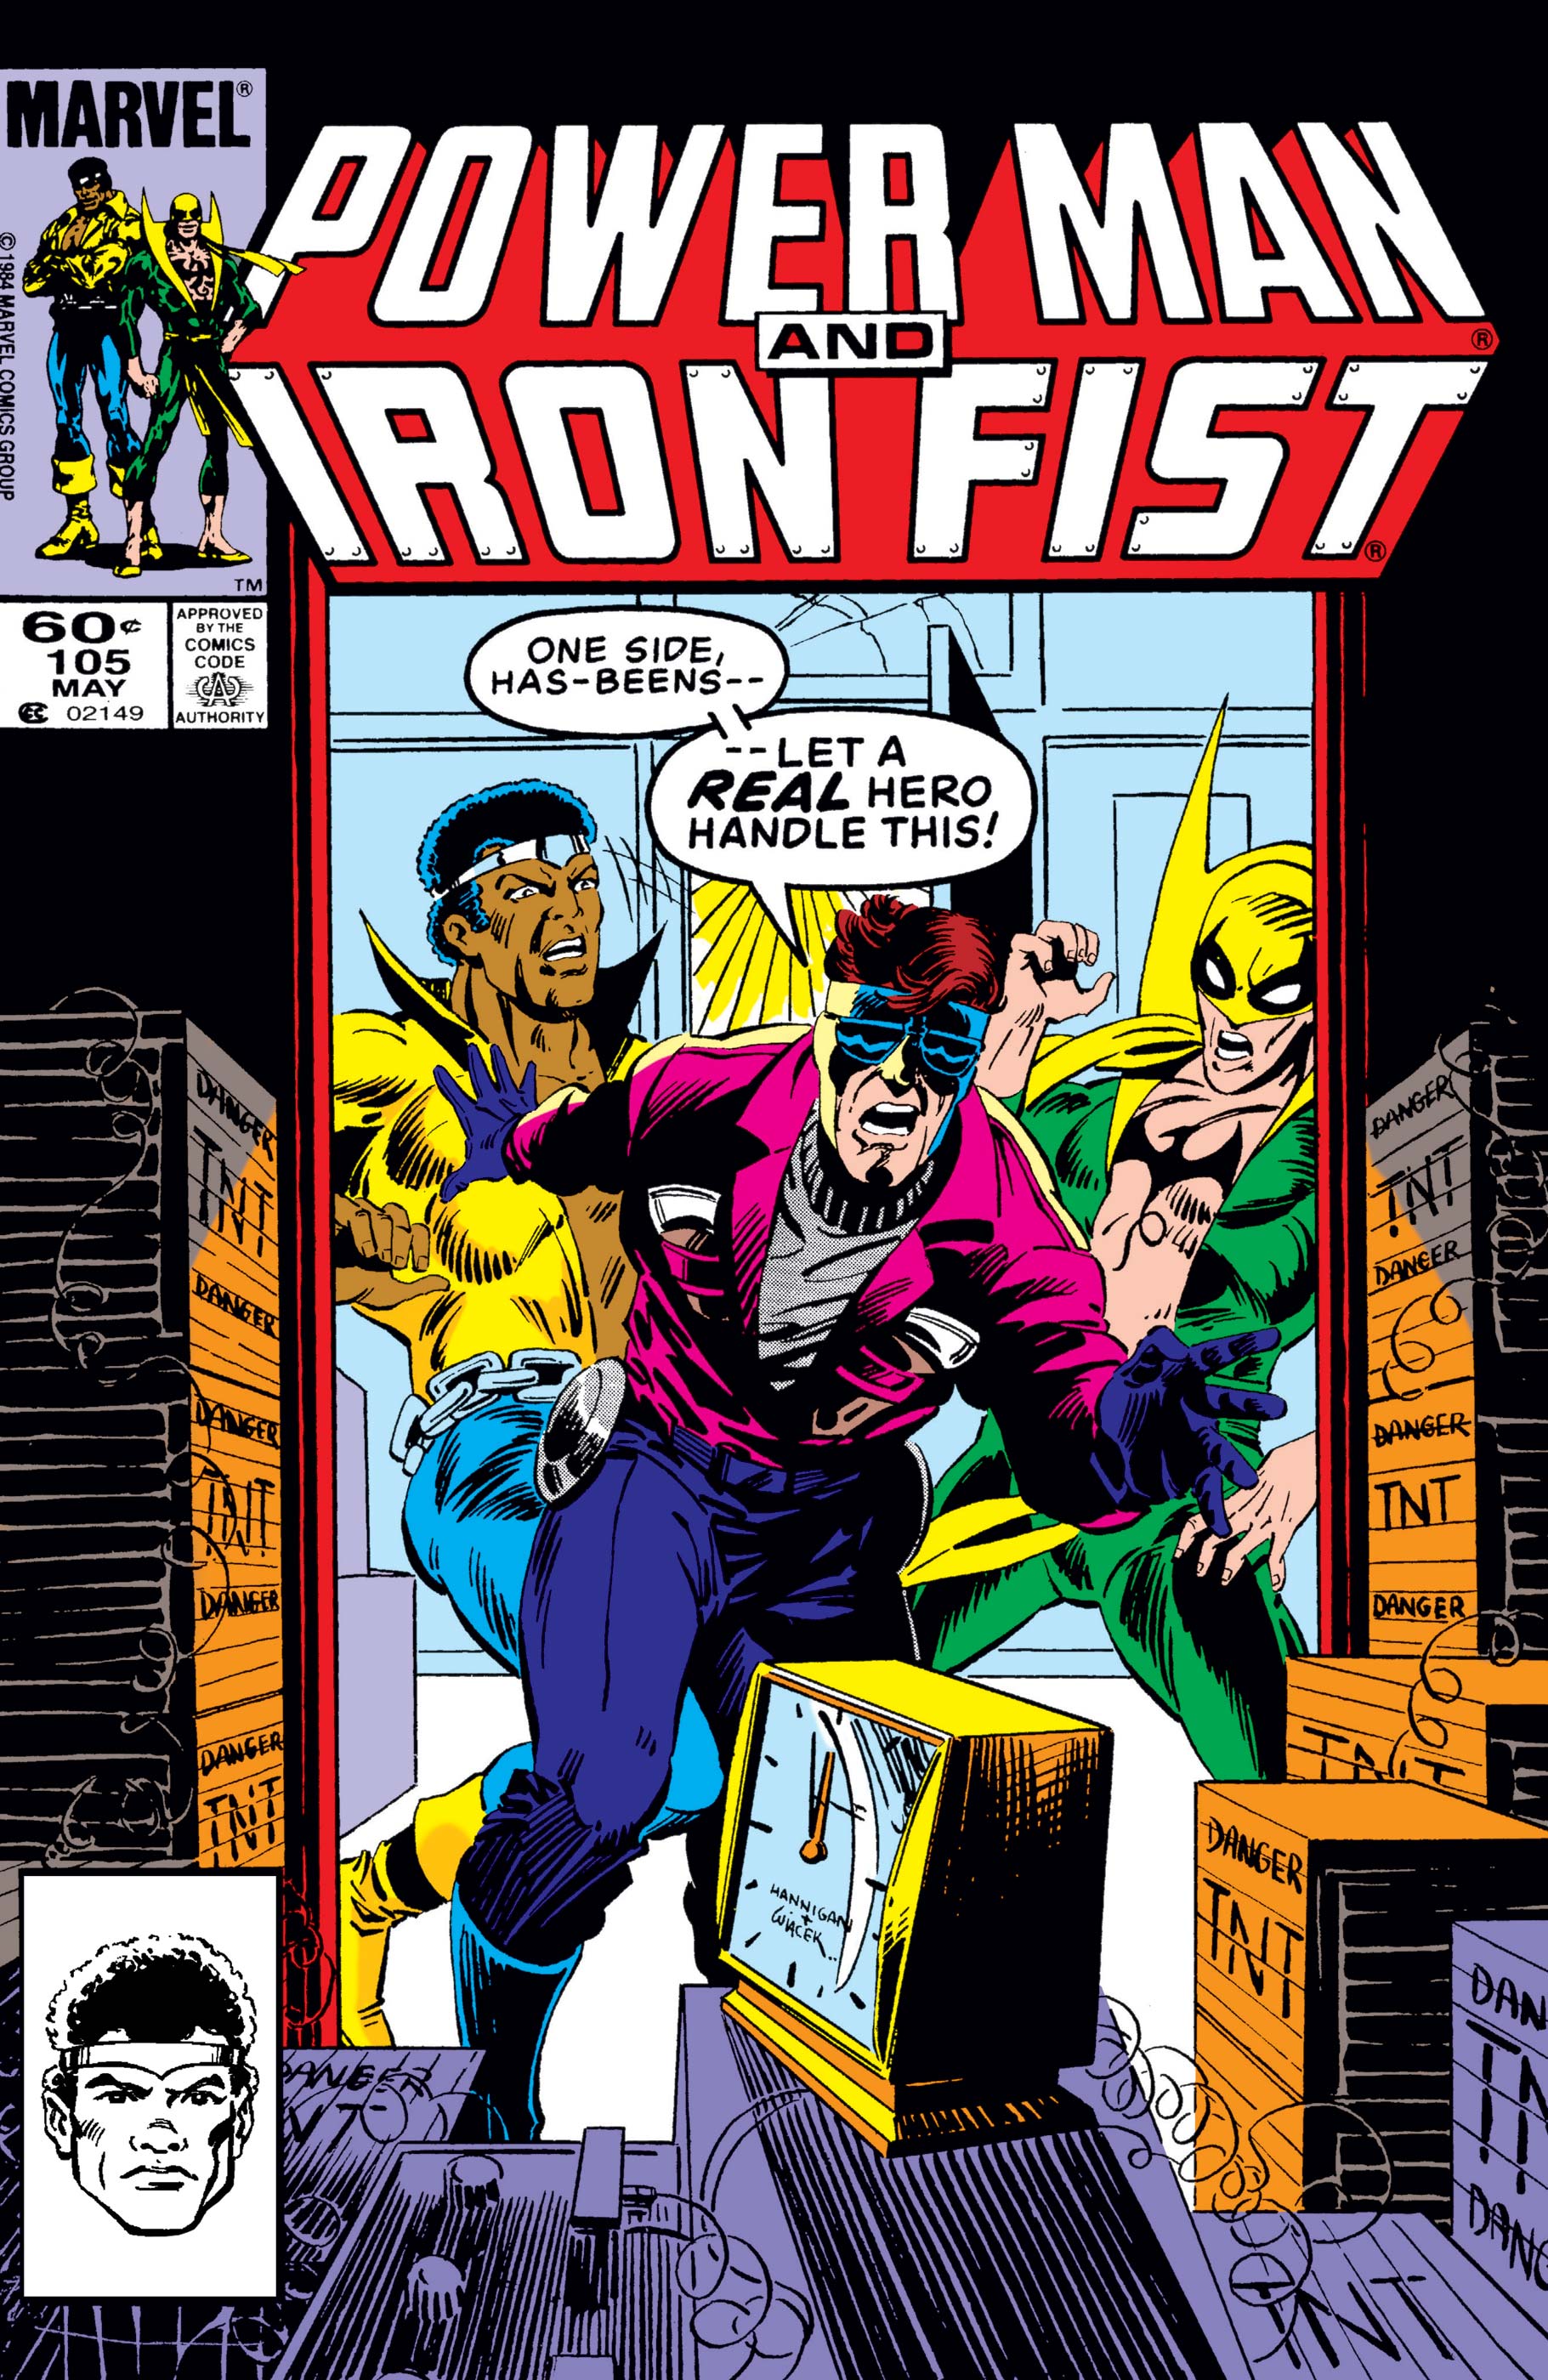 Power Man and Iron Fist (1978) #105